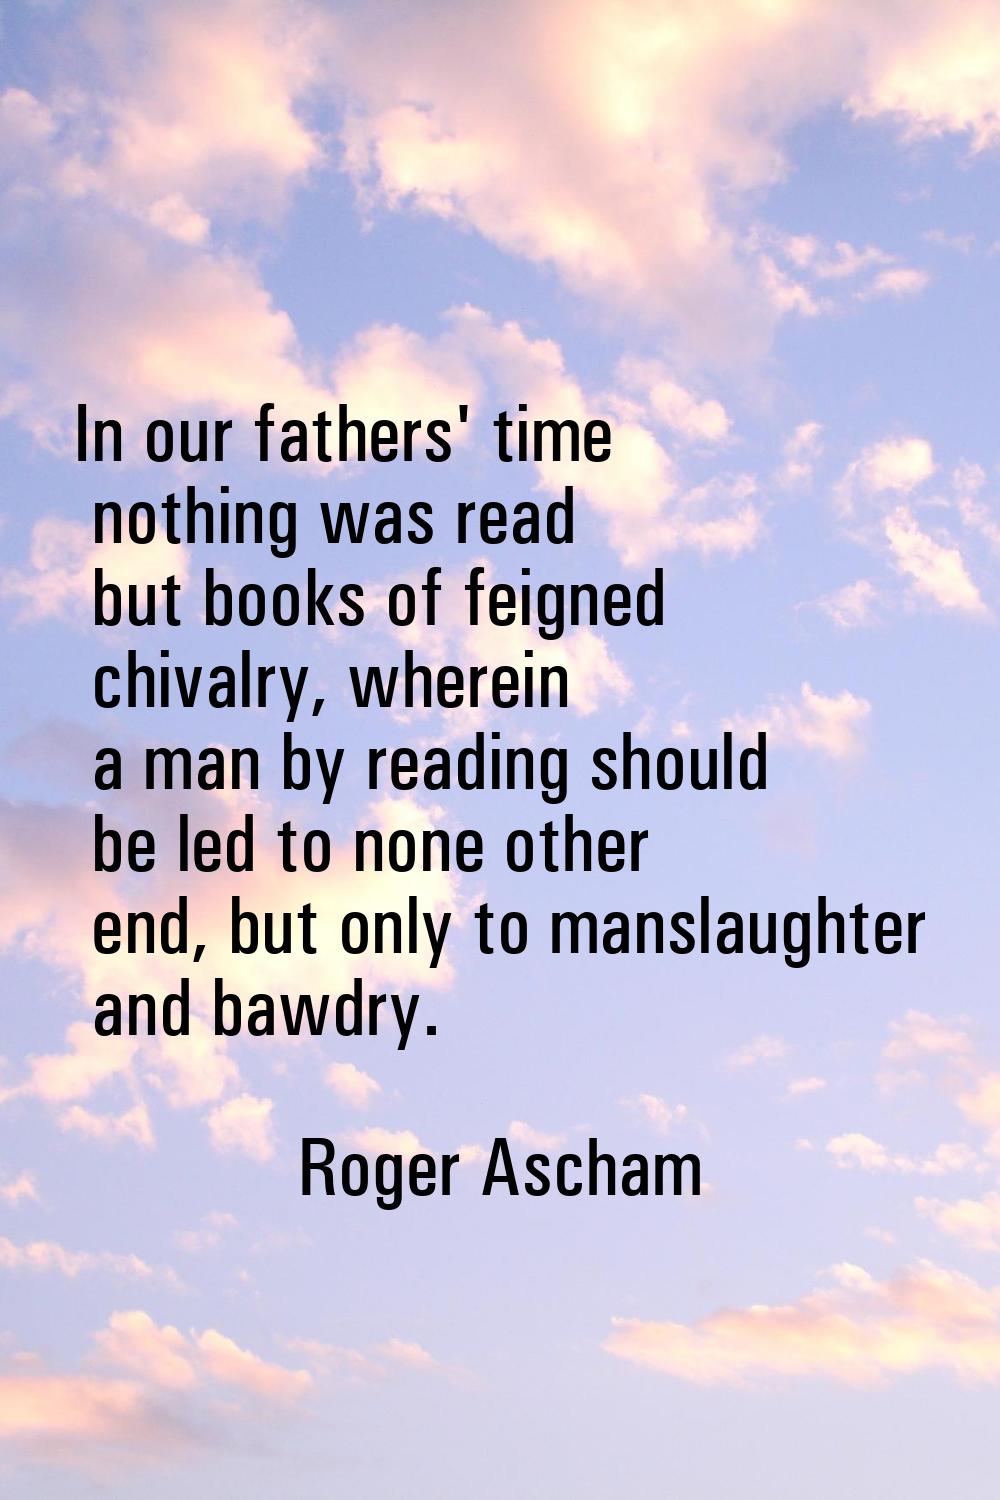 In our fathers' time nothing was read but books of feigned chivalry, wherein a man by reading shoul